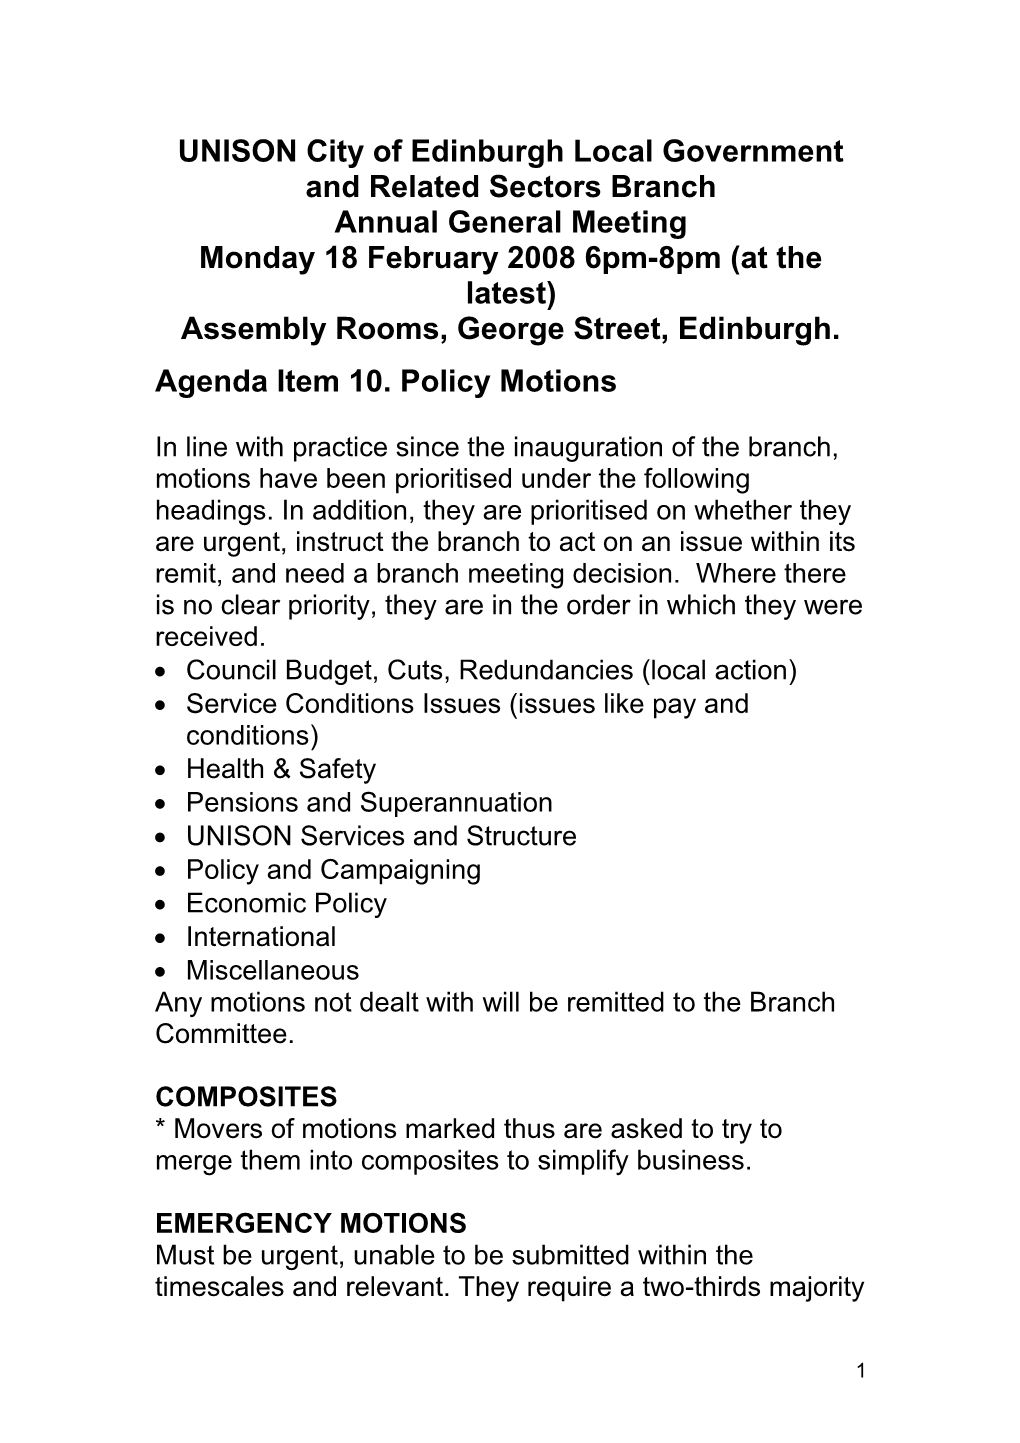 UNISON City of Edinburgh Local Government and Related Sectors Branch